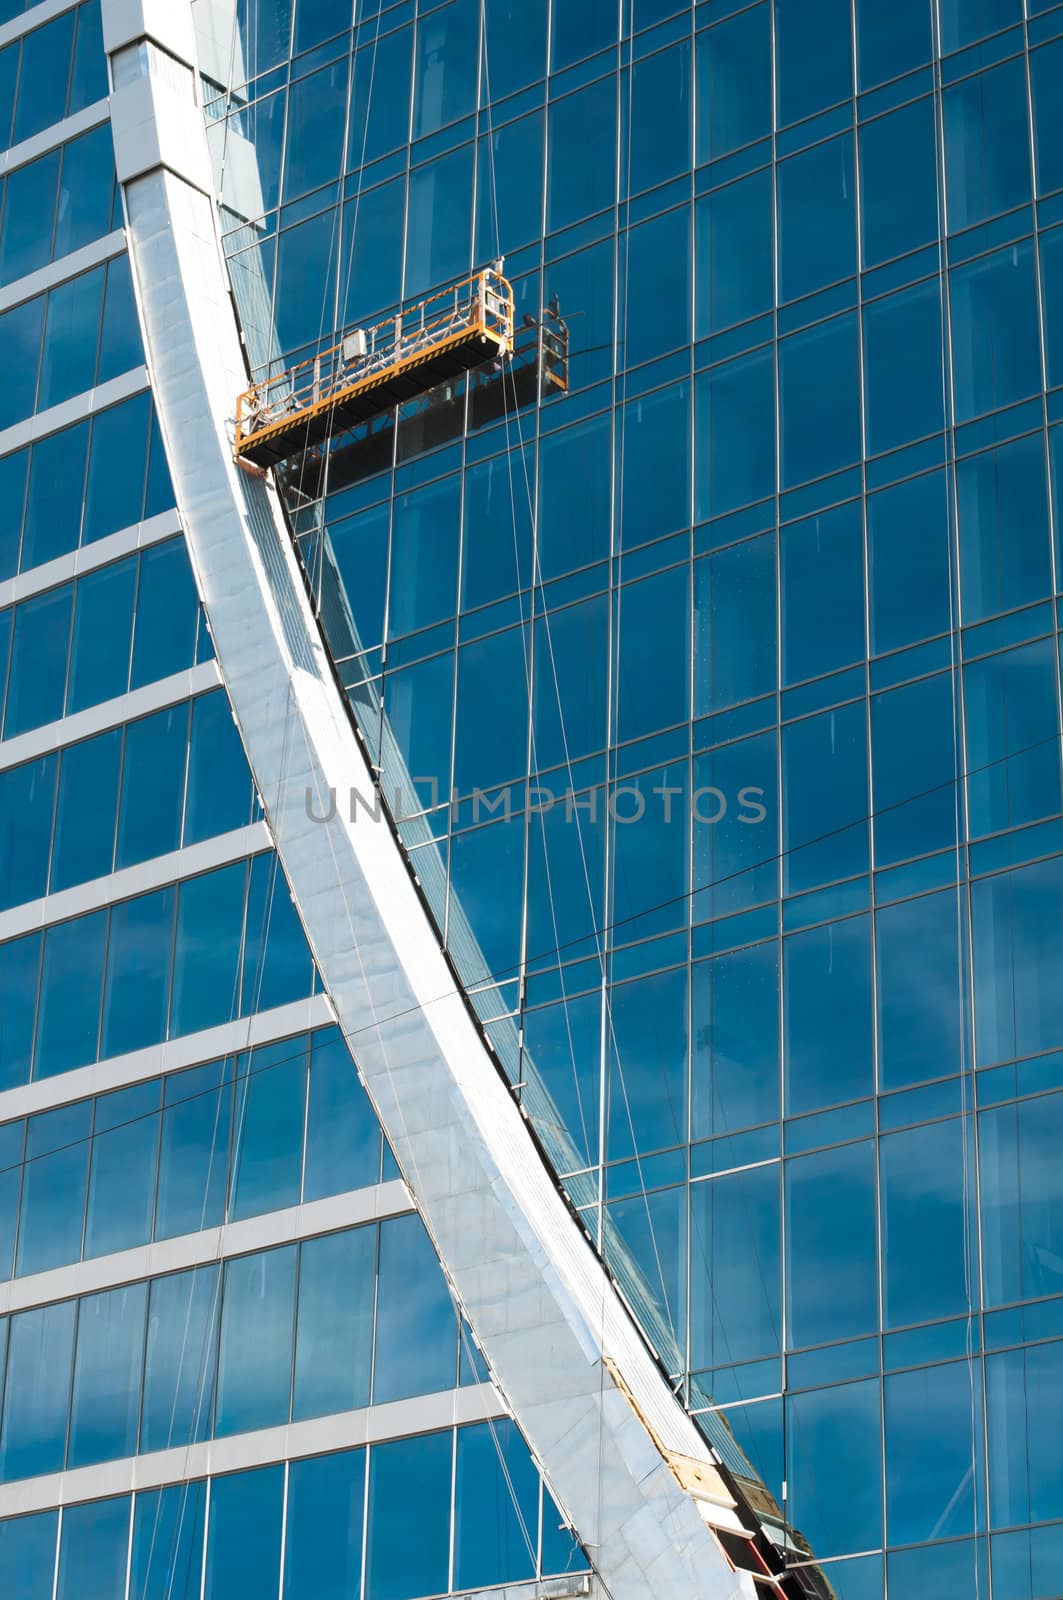 The glass wall of office building by nvelichko